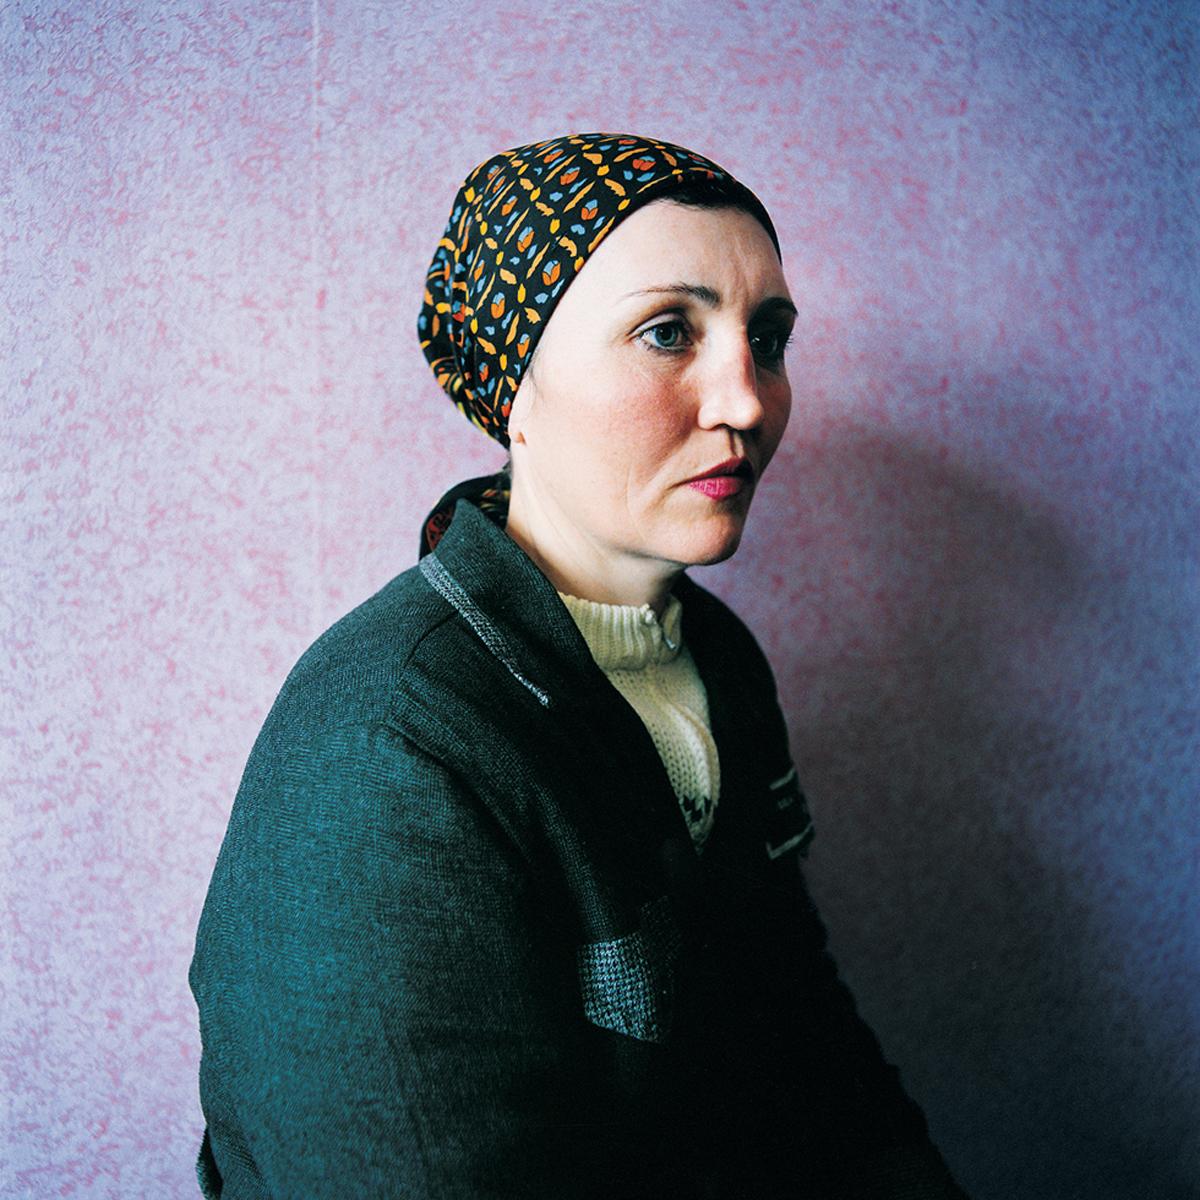 Michal Chelbin Color Photograph - Ira (Sentenced for Theft): Women’s Prison